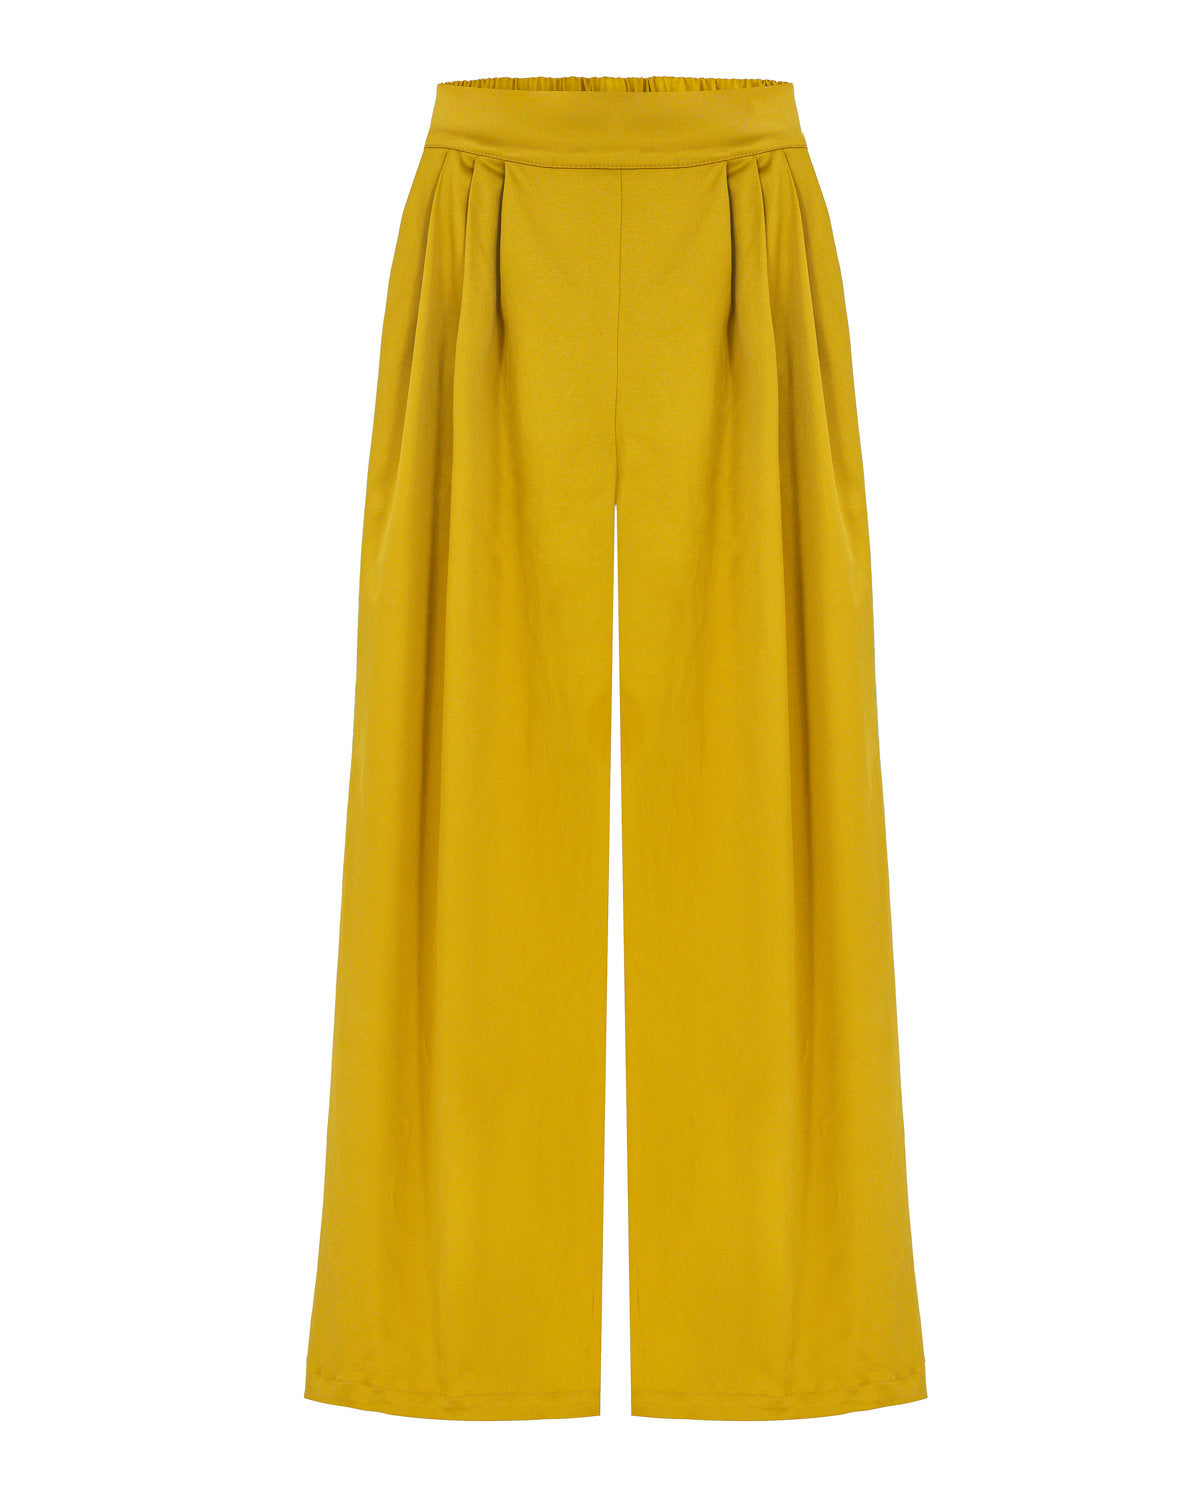 Wide leg pants in satin gold